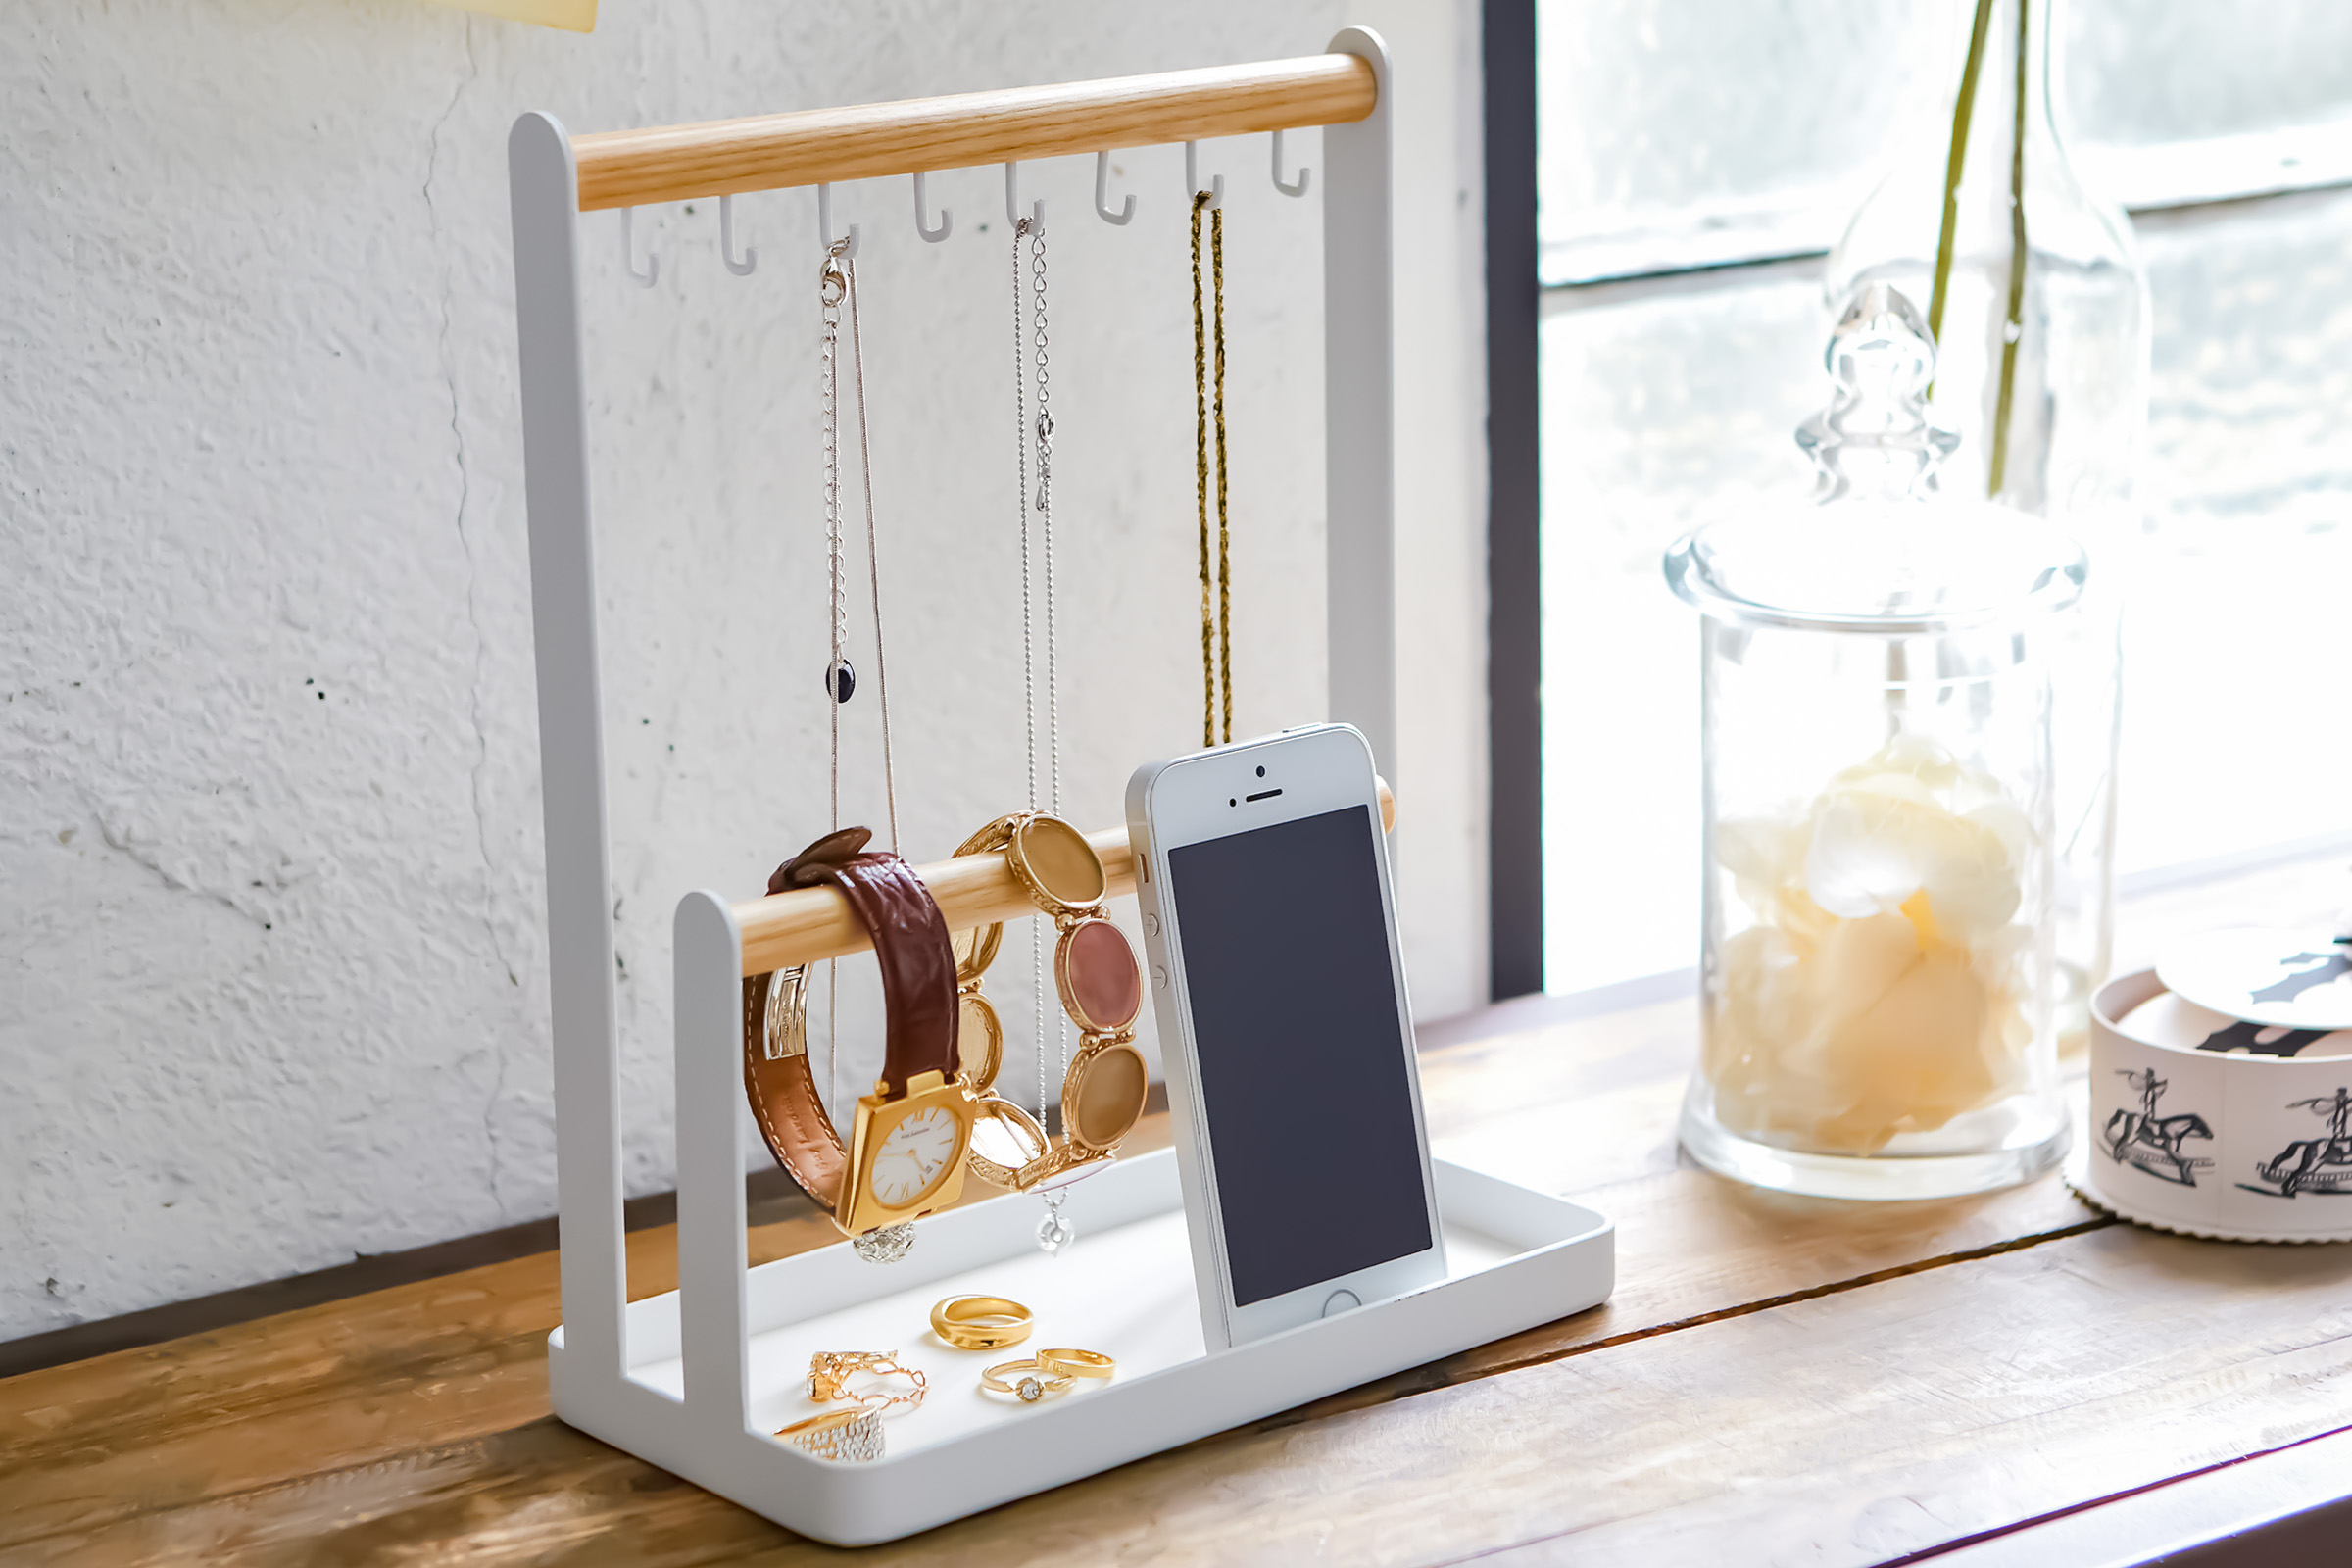 White Yamazaki Home Jewelry + Accessory Display with necklaces, watches and a phone displayed